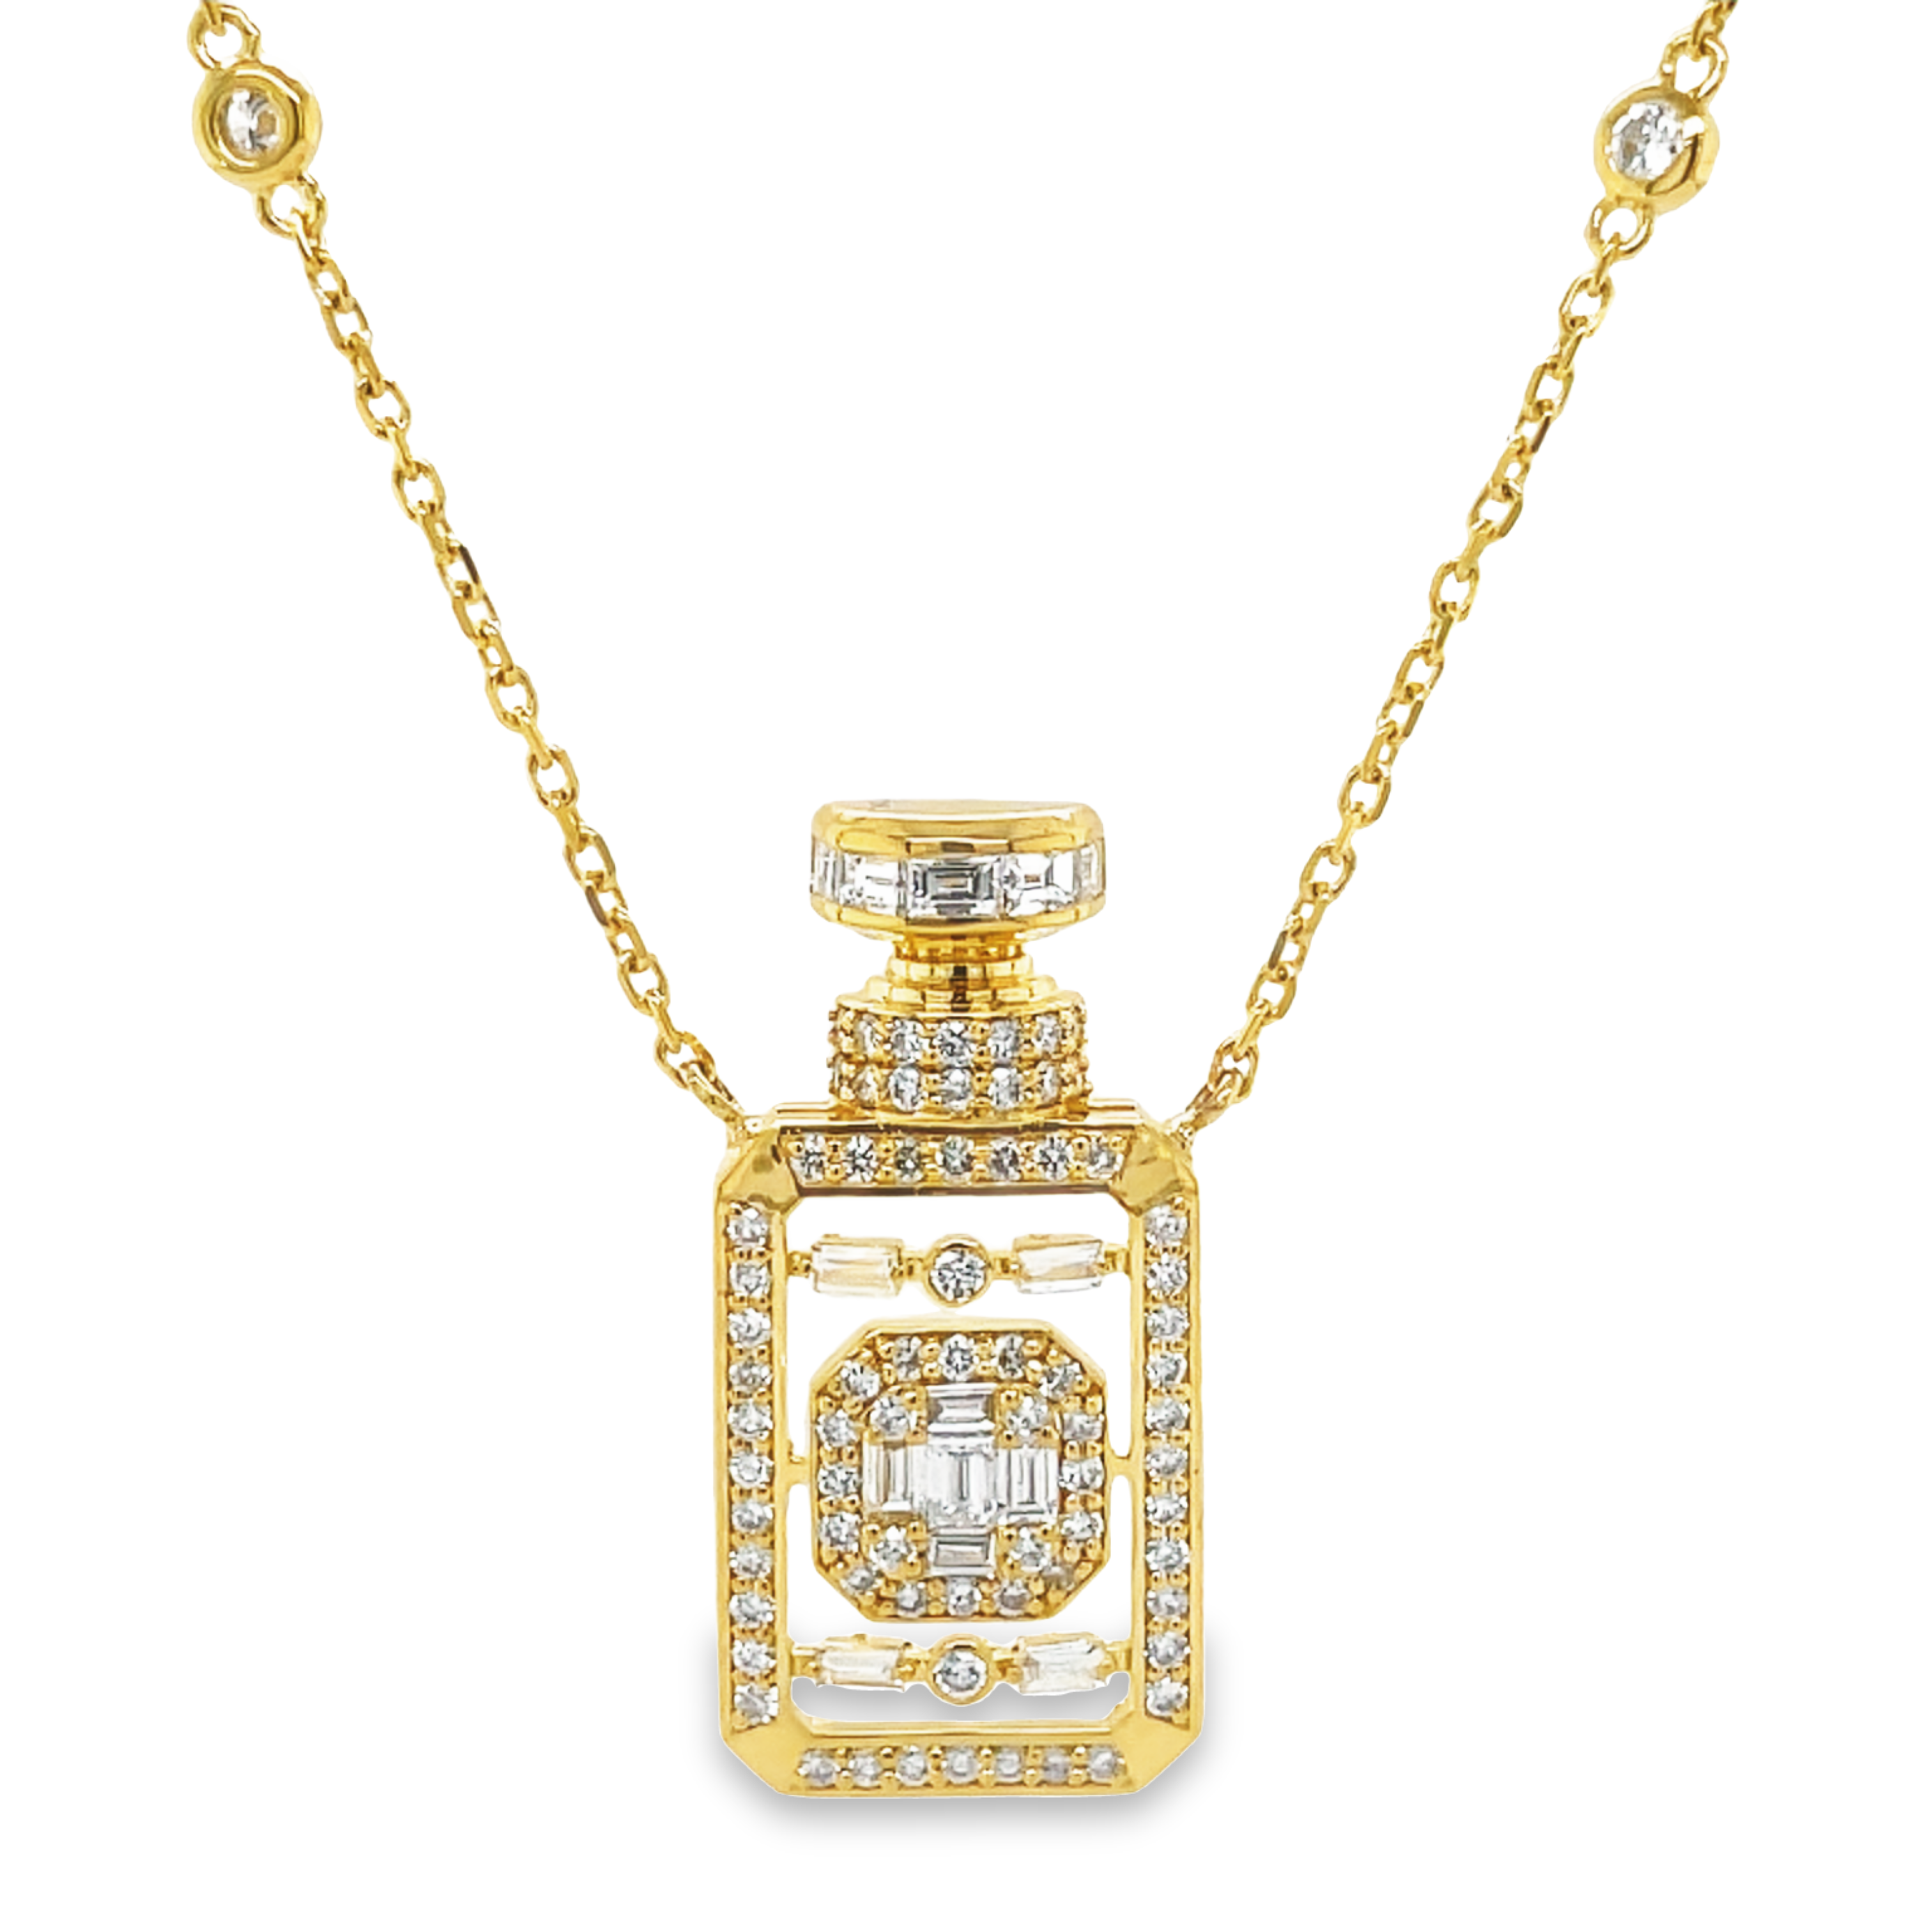 Unique diamond charm with baguettes & round diamonds   1.07 cts F/G color  1" long  18k yellow gold.  sturdy chain  8 round diamonds  Secure lobster catch.  18" long with sizing loop at 16"